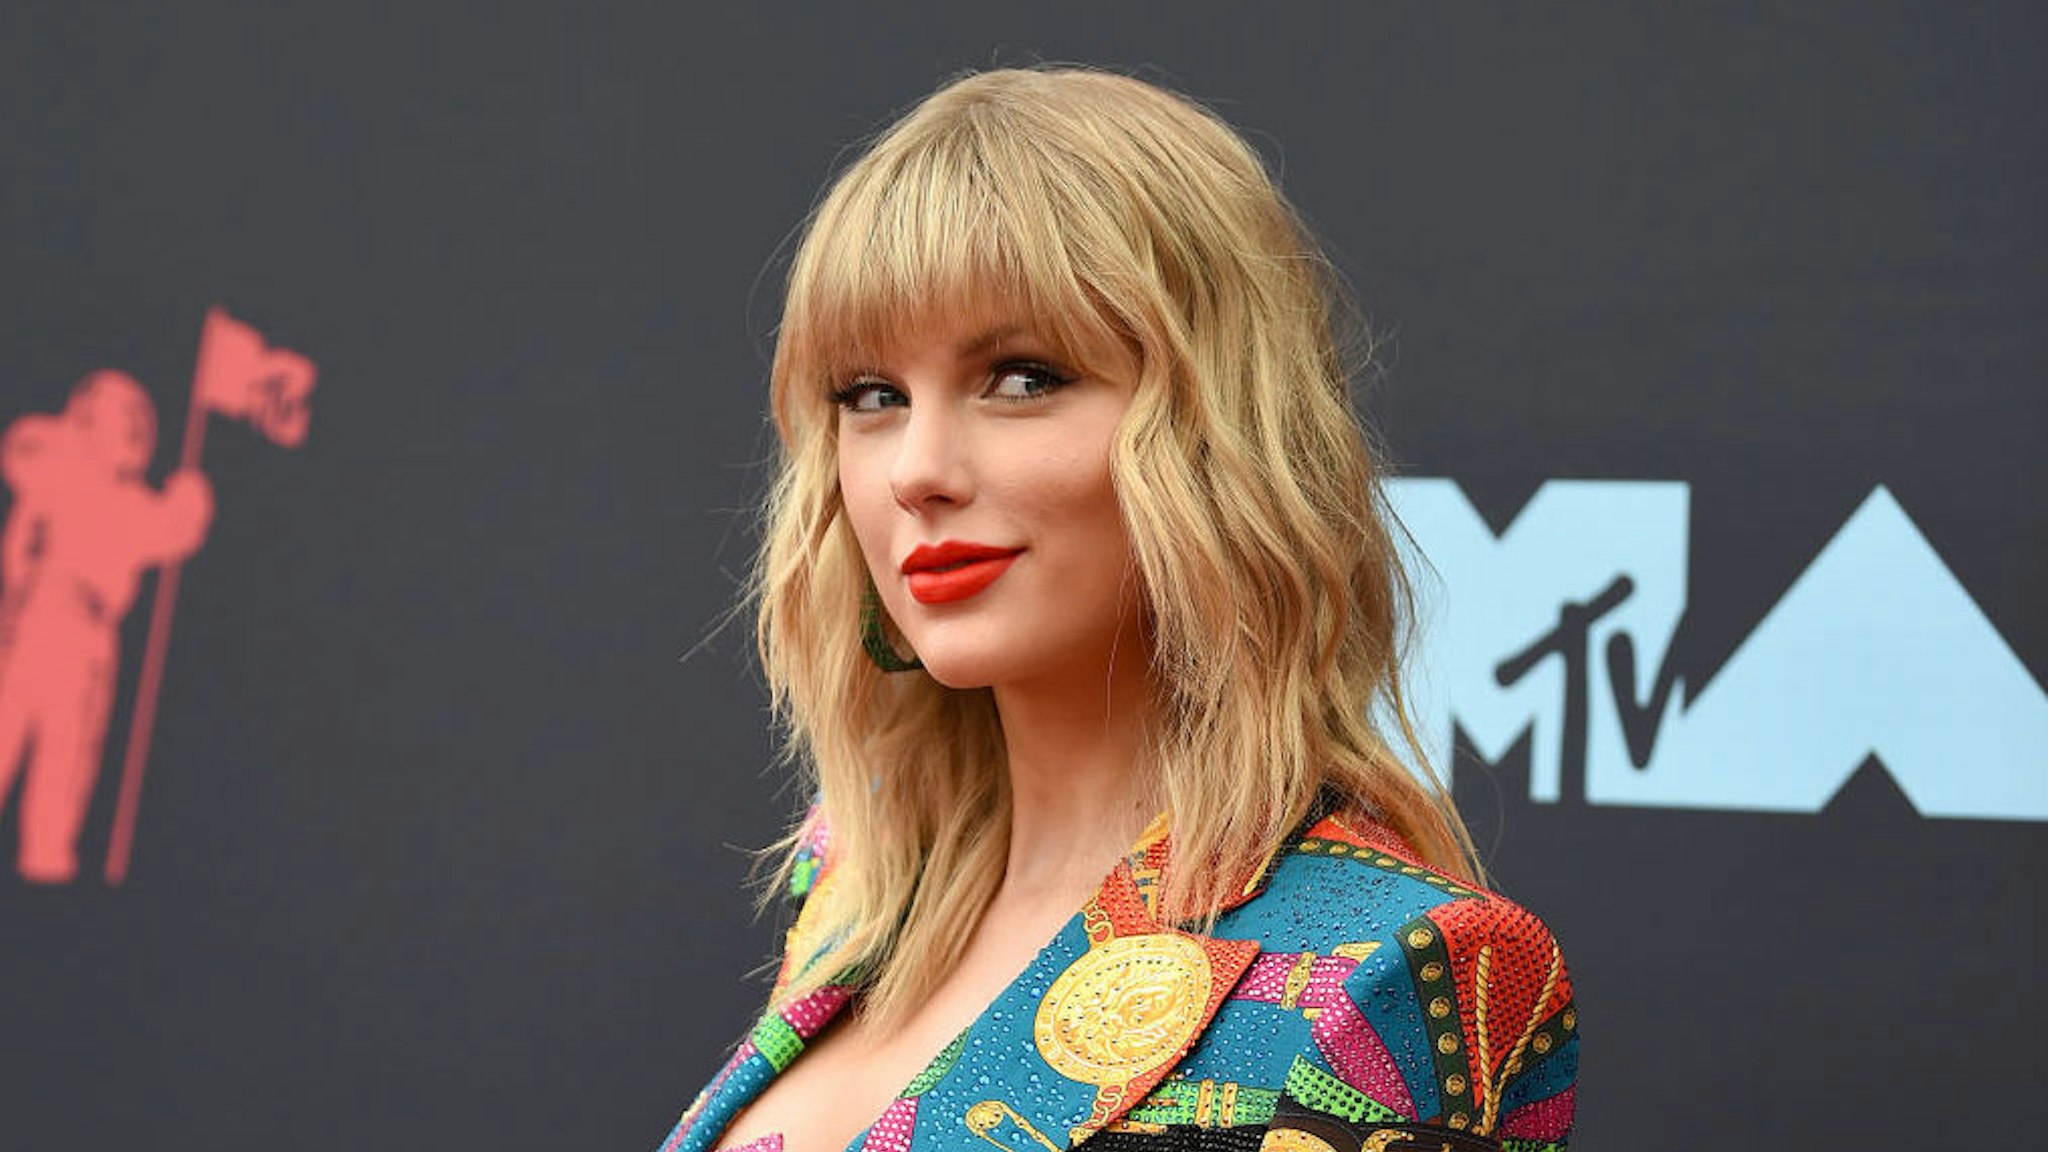 Taylor Swift attends the 2019 MTV Video Music Awards at Prudential Center on August 26, 2019 in Newark, New Jersey. (Photo by Dimitrios Kambouris/Getty Images)